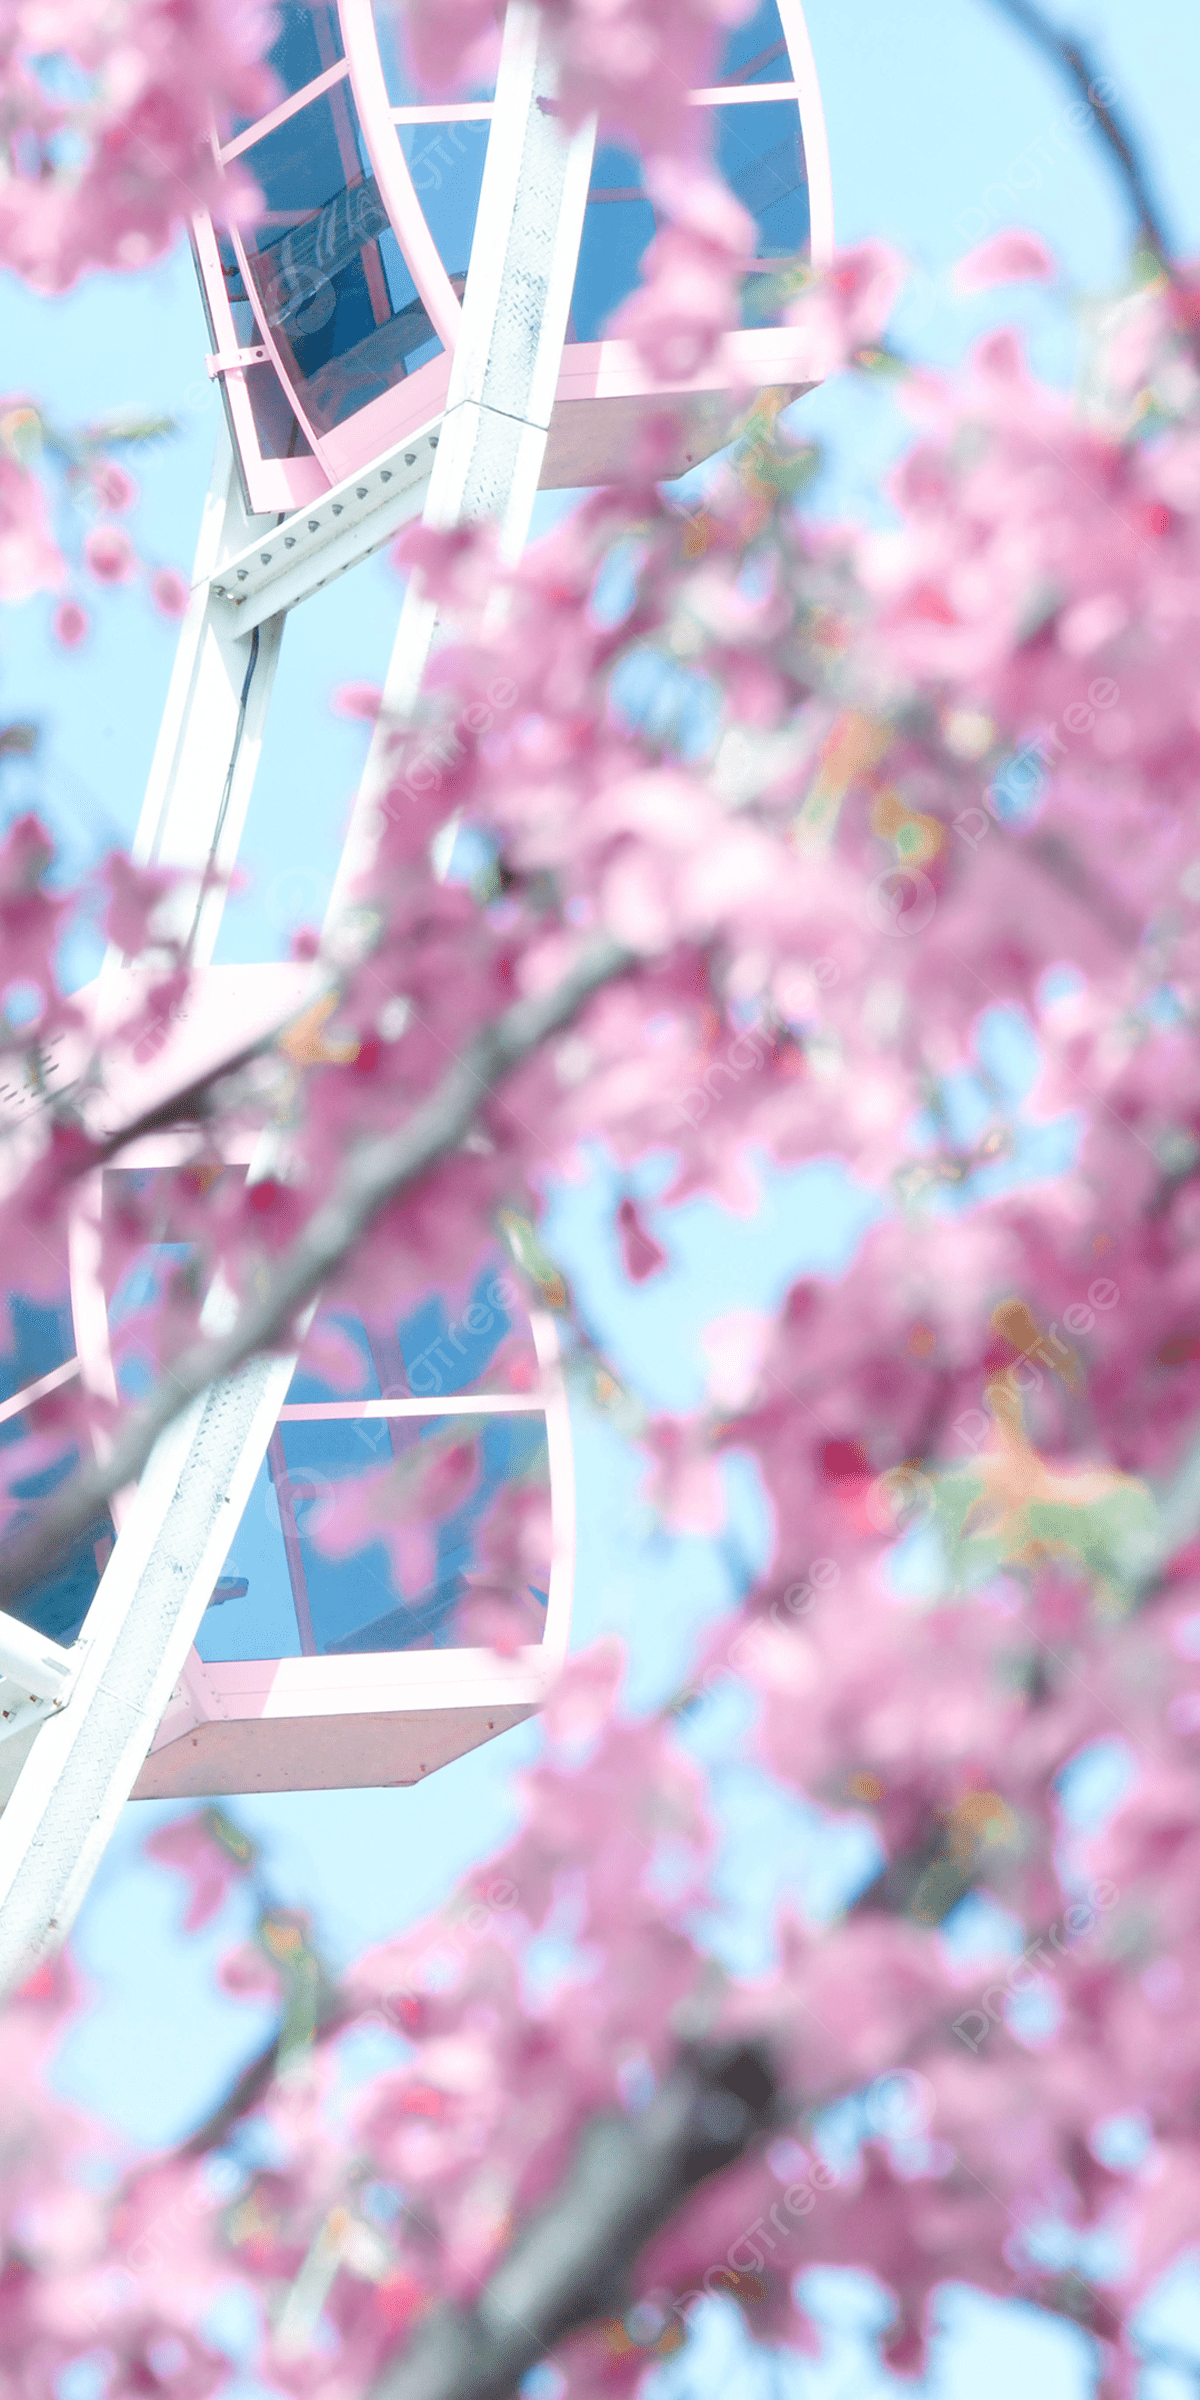 Sakura Vertical Version Of Cherry Blossom Spring Photography Picture Romantic Phone Wallpaper Background, Sakura, Cherry Blossoms, Spring Background Image for Free Download